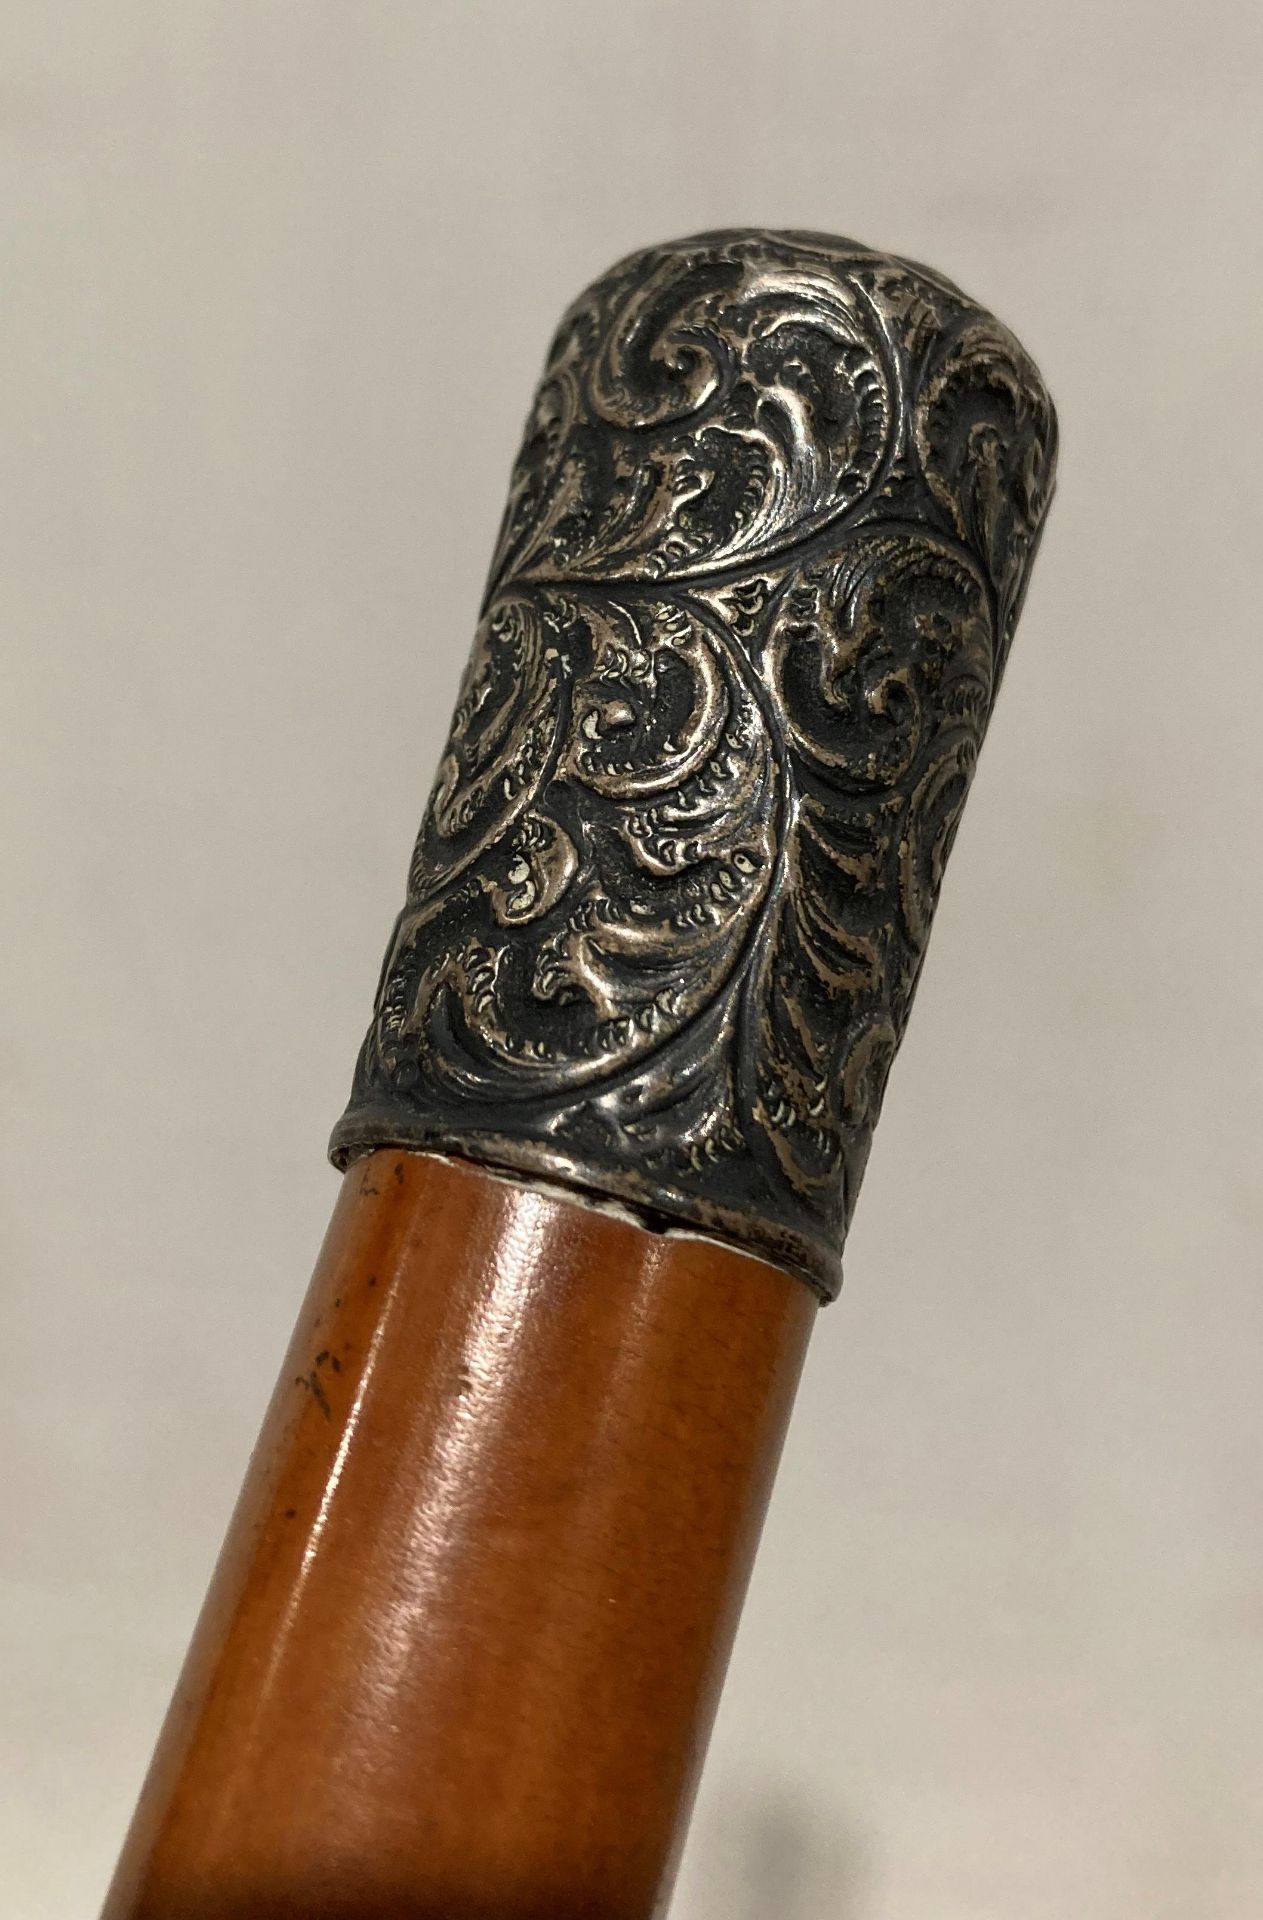 Silver mounted wooden walking stick (86. - Image 2 of 3